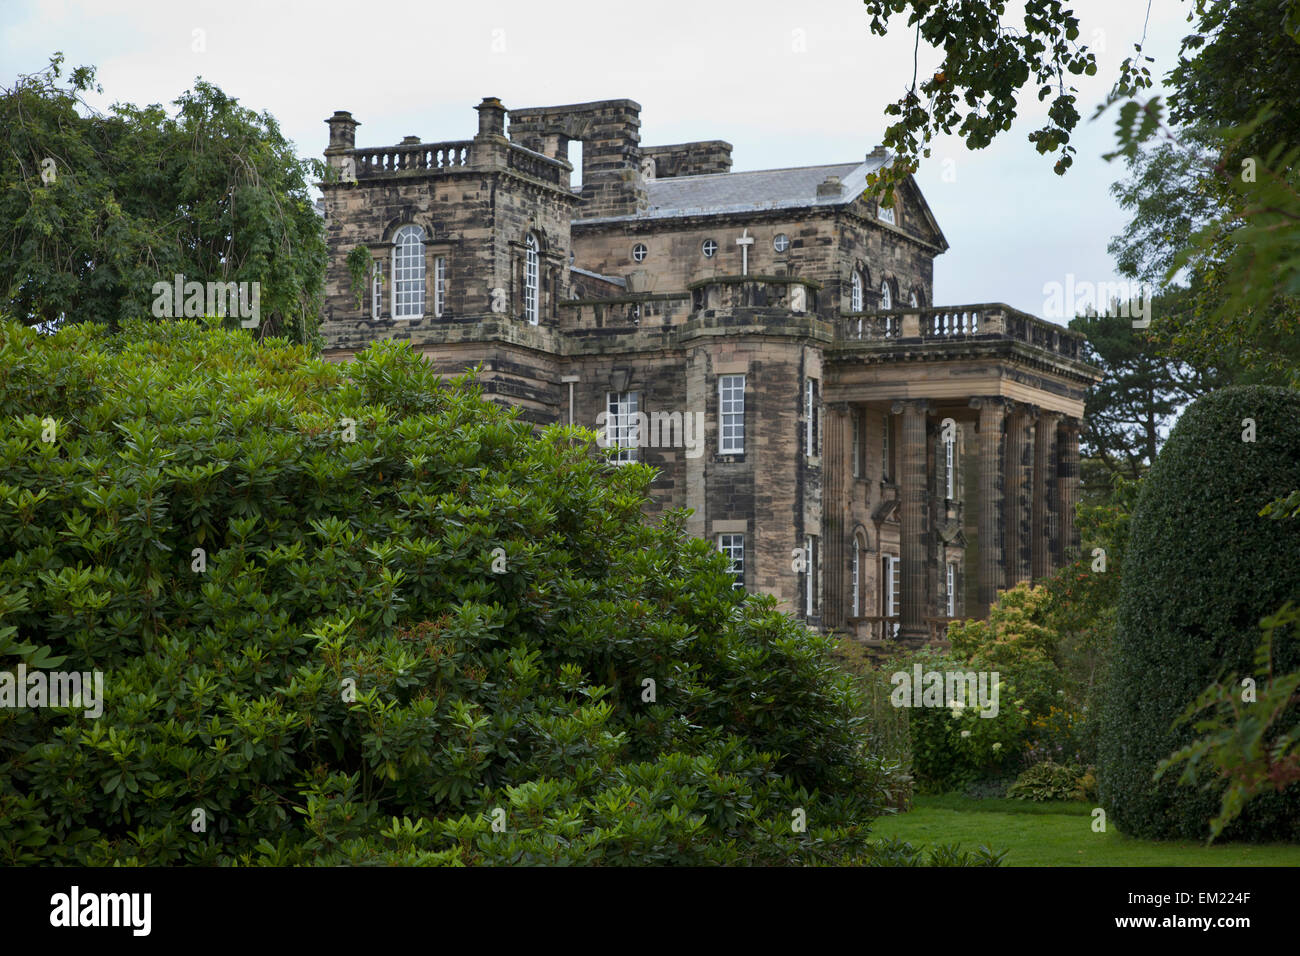 Howick Hall ; Northumberland England Banque D'Images